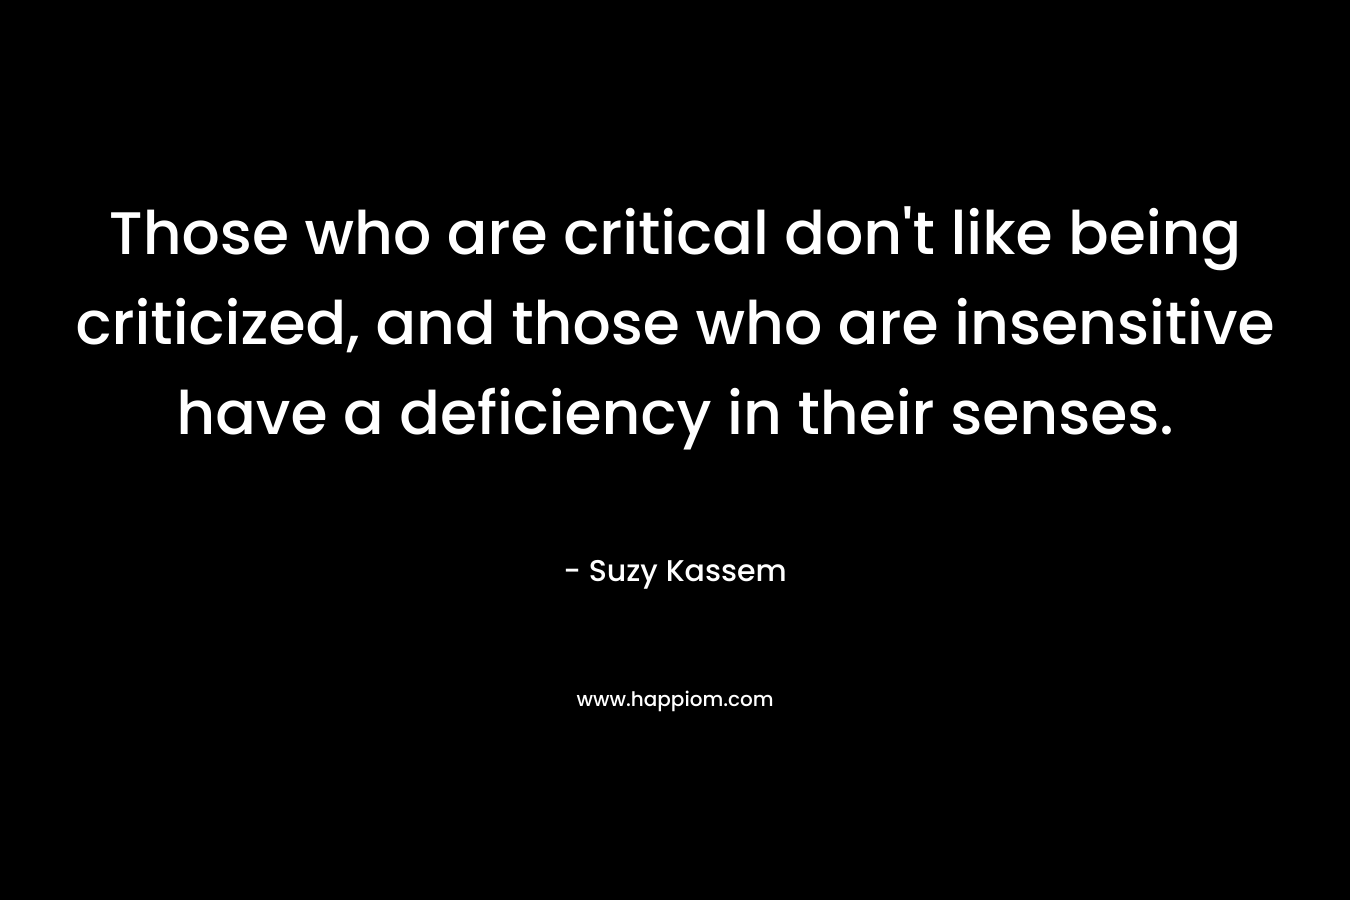 Those who are critical don’t like being criticized, and those who are insensitive have a deficiency in their senses. – Suzy Kassem